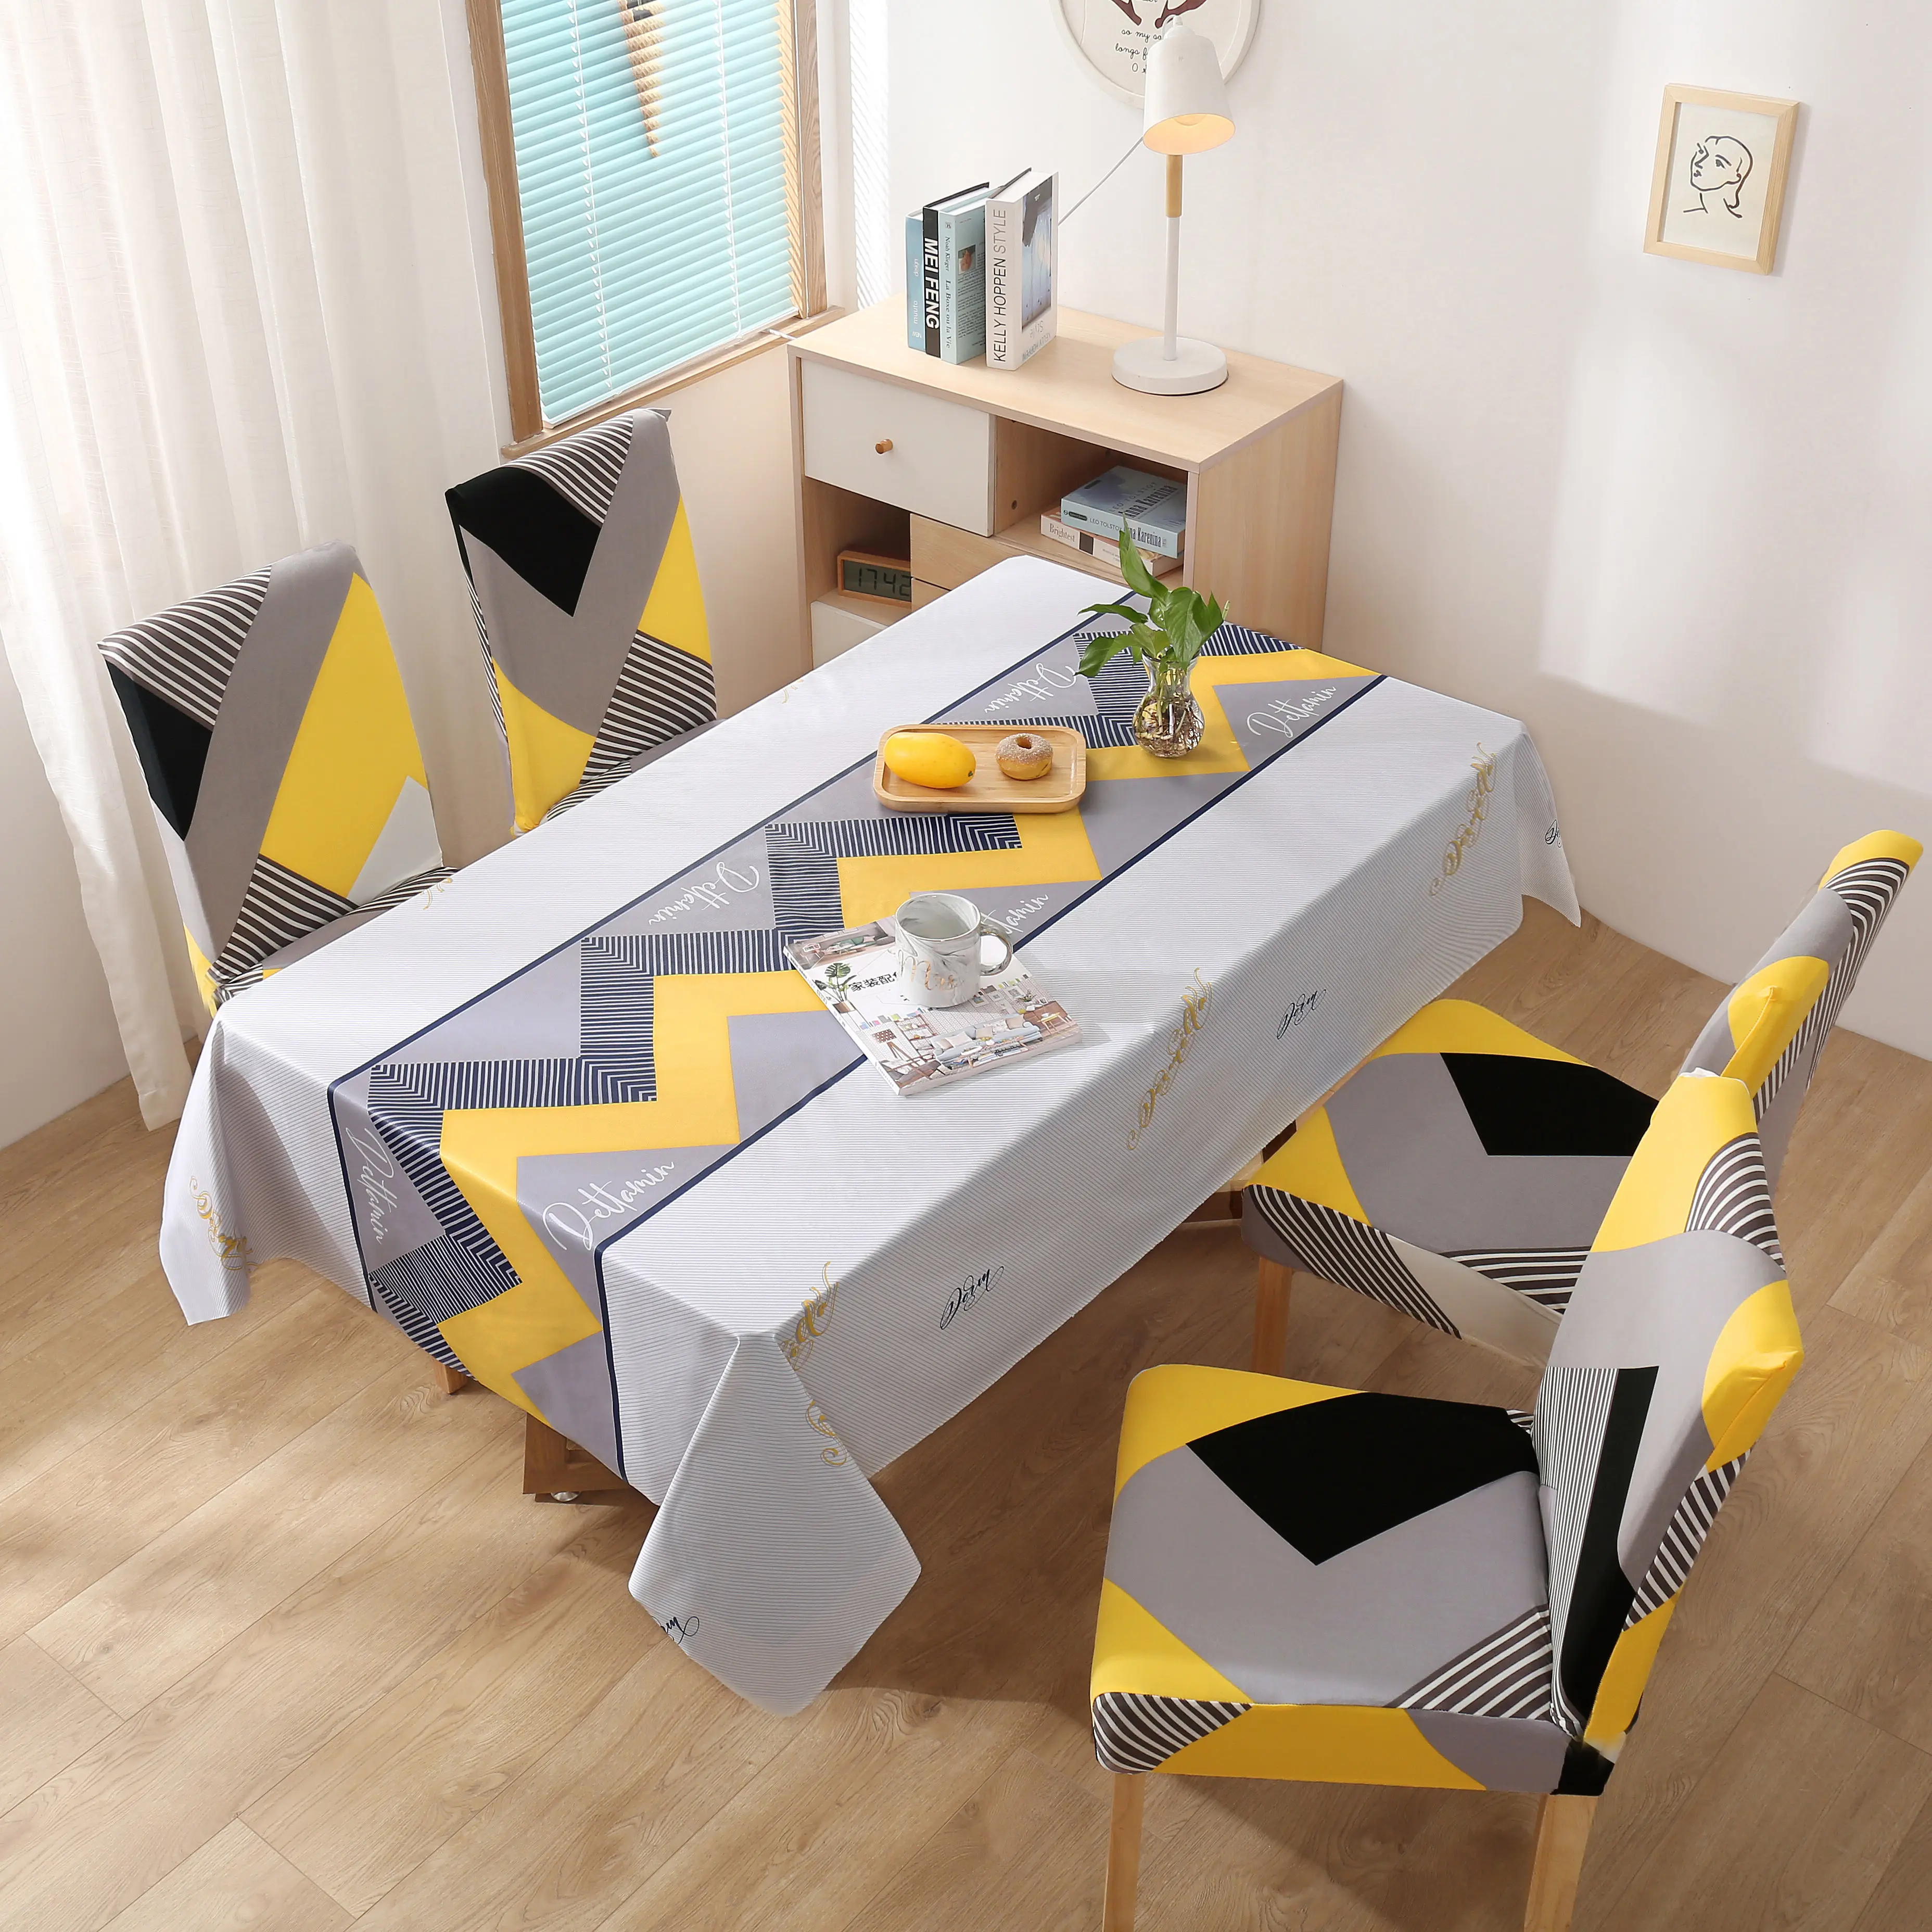 PVC Rectangular Tablecloth Printed Oil-Proof Oilproof Tea Coffee Table Cover Home Decor Table Linens and Chair Covers